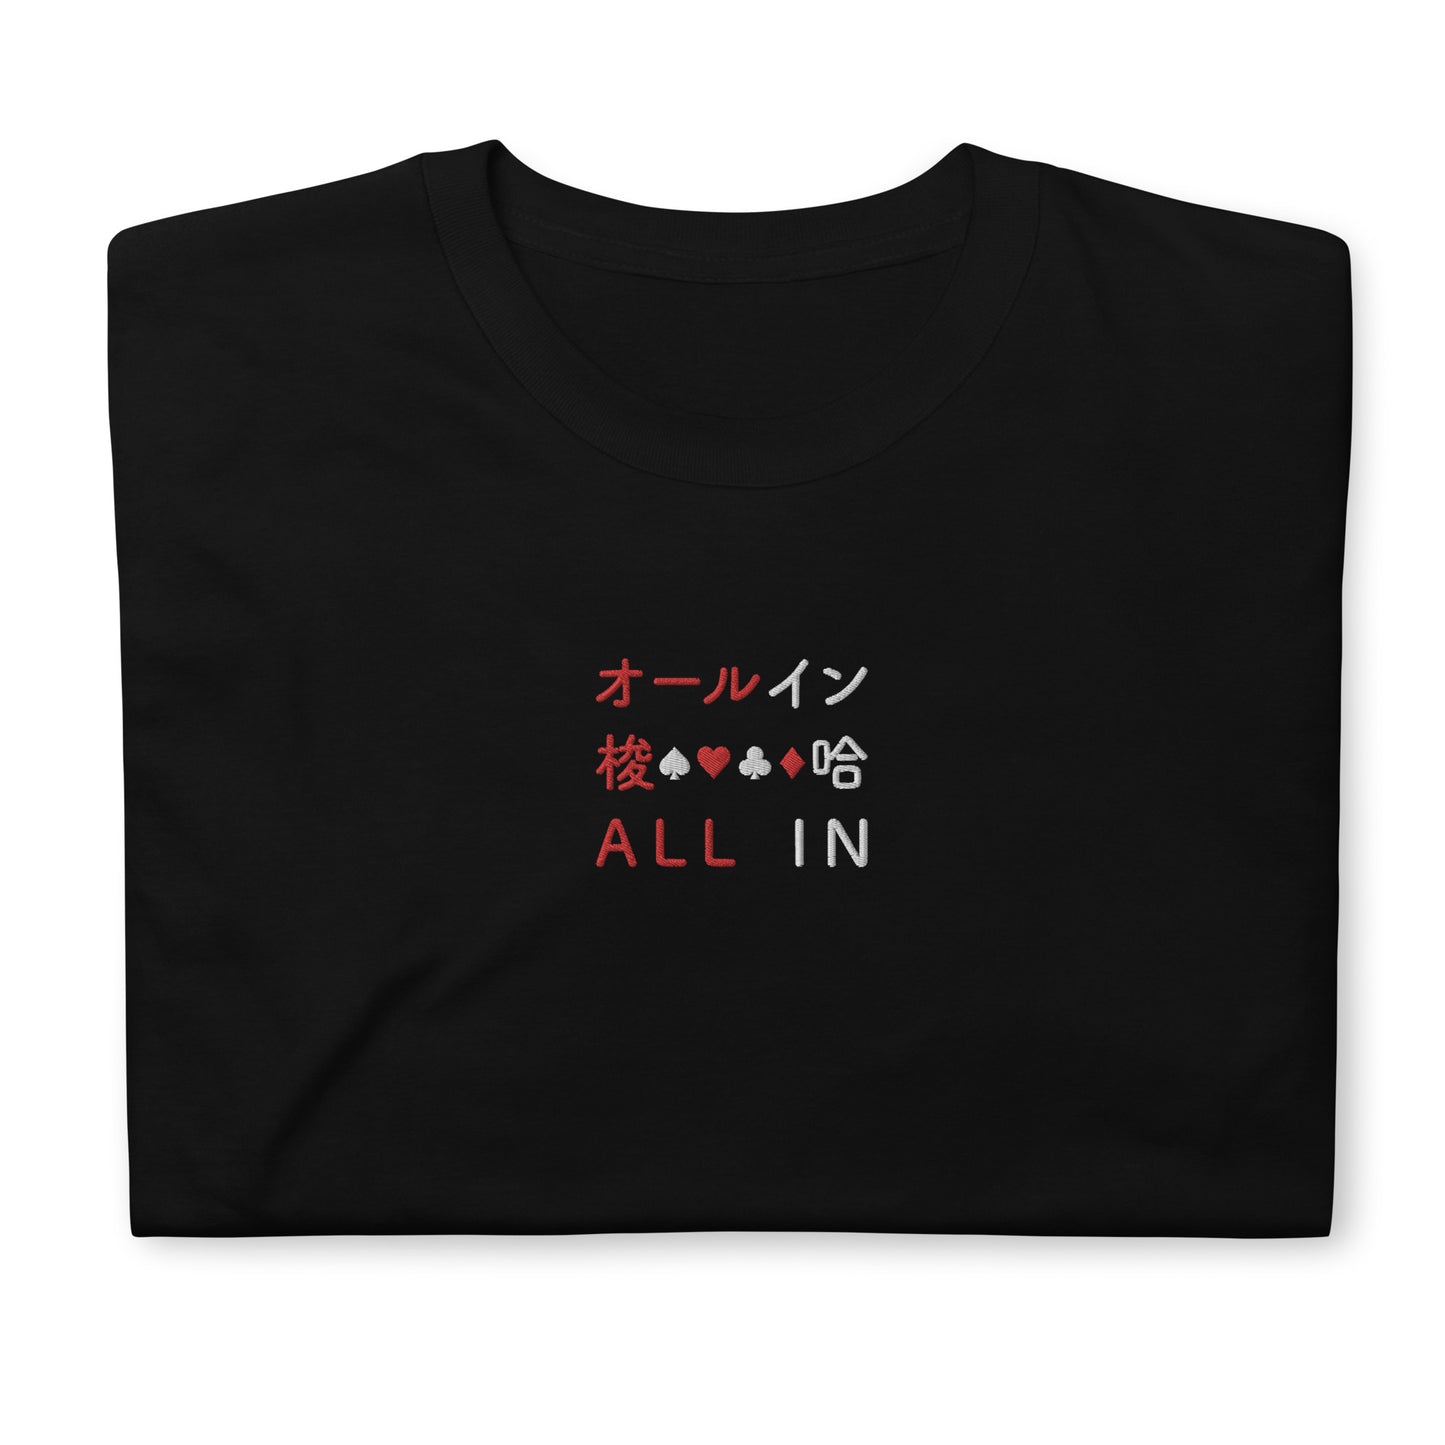 Black High Quality Tee - Front Design with an Red, White Embroidery "All IN" in Japanese,Chinese and English